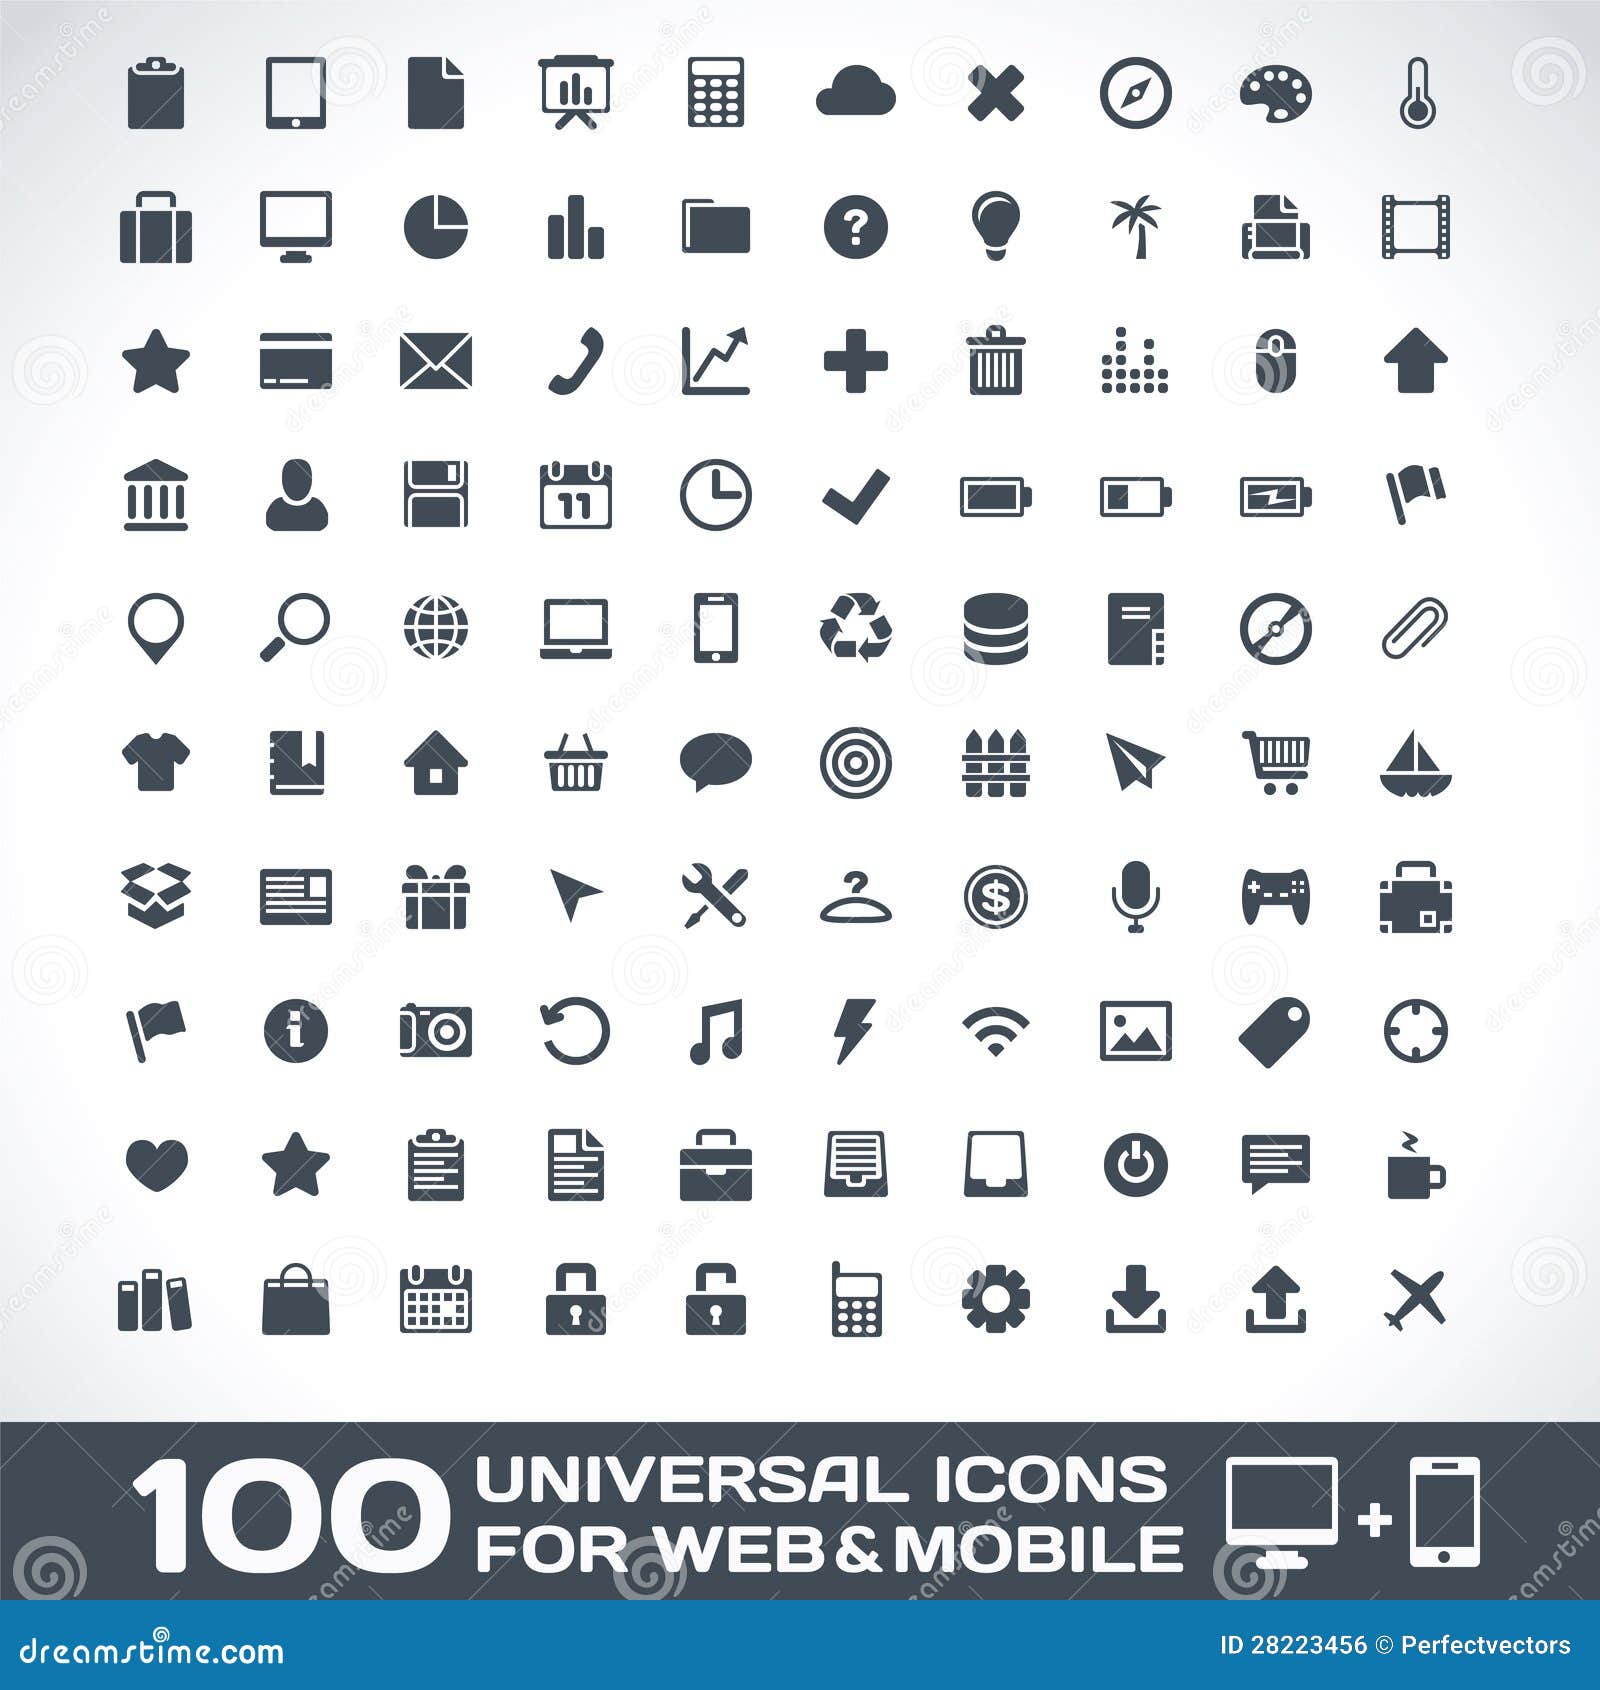 100 universal icons for web and mobile